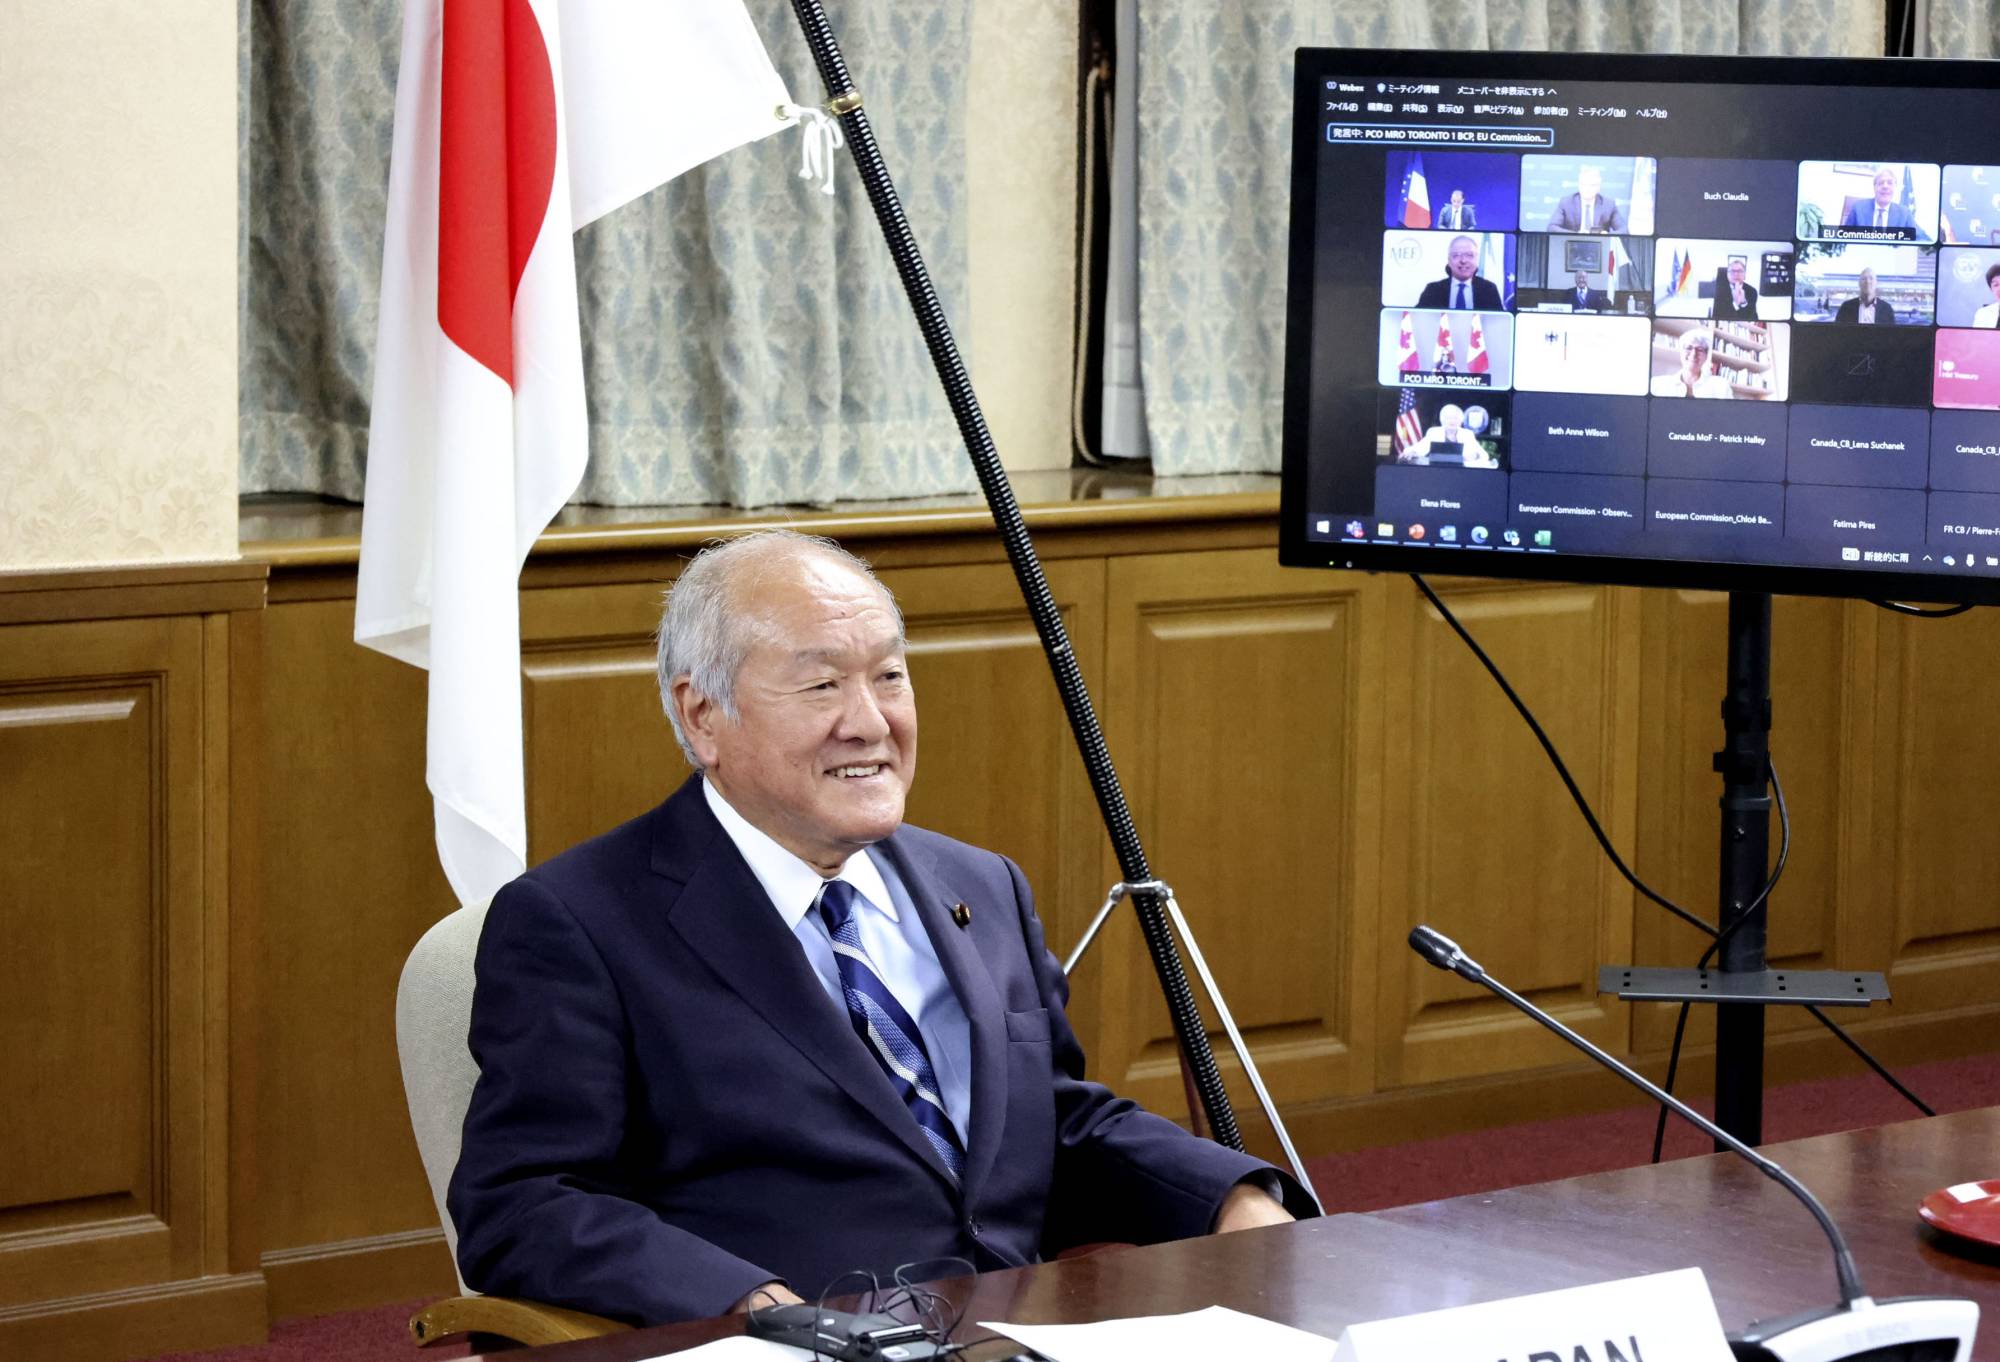 Finance Minister Shunichi Suzuki takes part in an online meeting of Group of Seven finance chiefs and central bank governors on Friday. | FINANCE MINISTRY / VIA KYODO